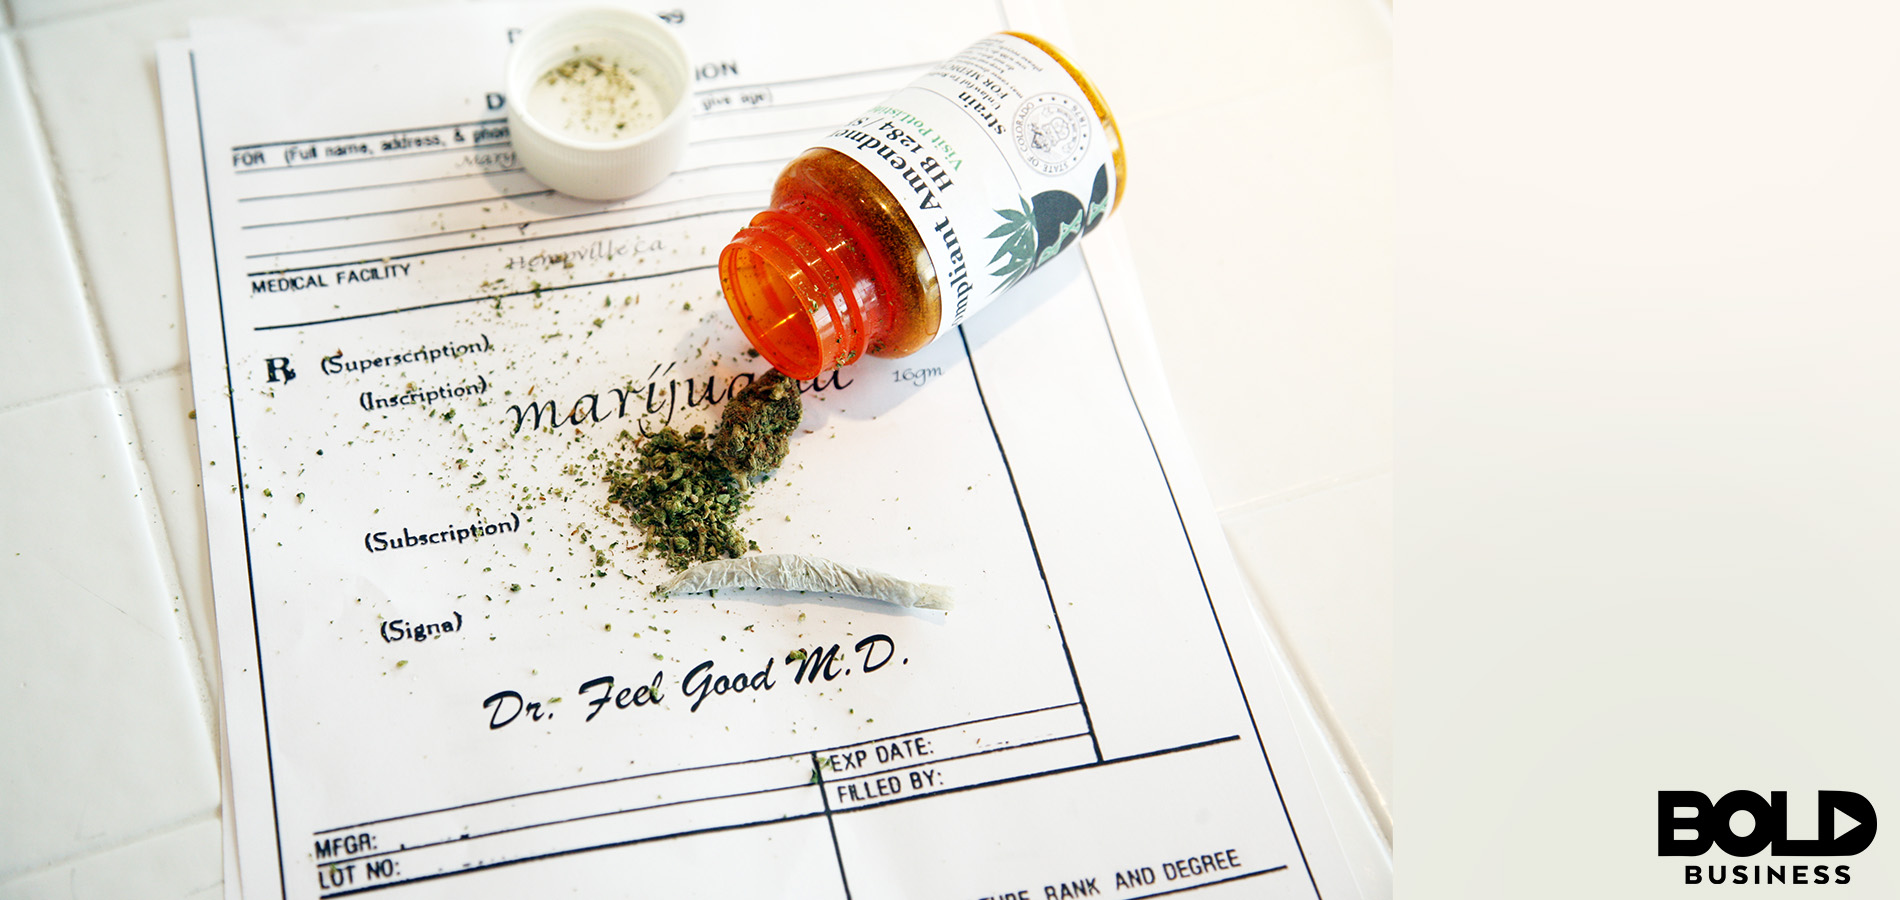 older adults and medical marijuana on some form